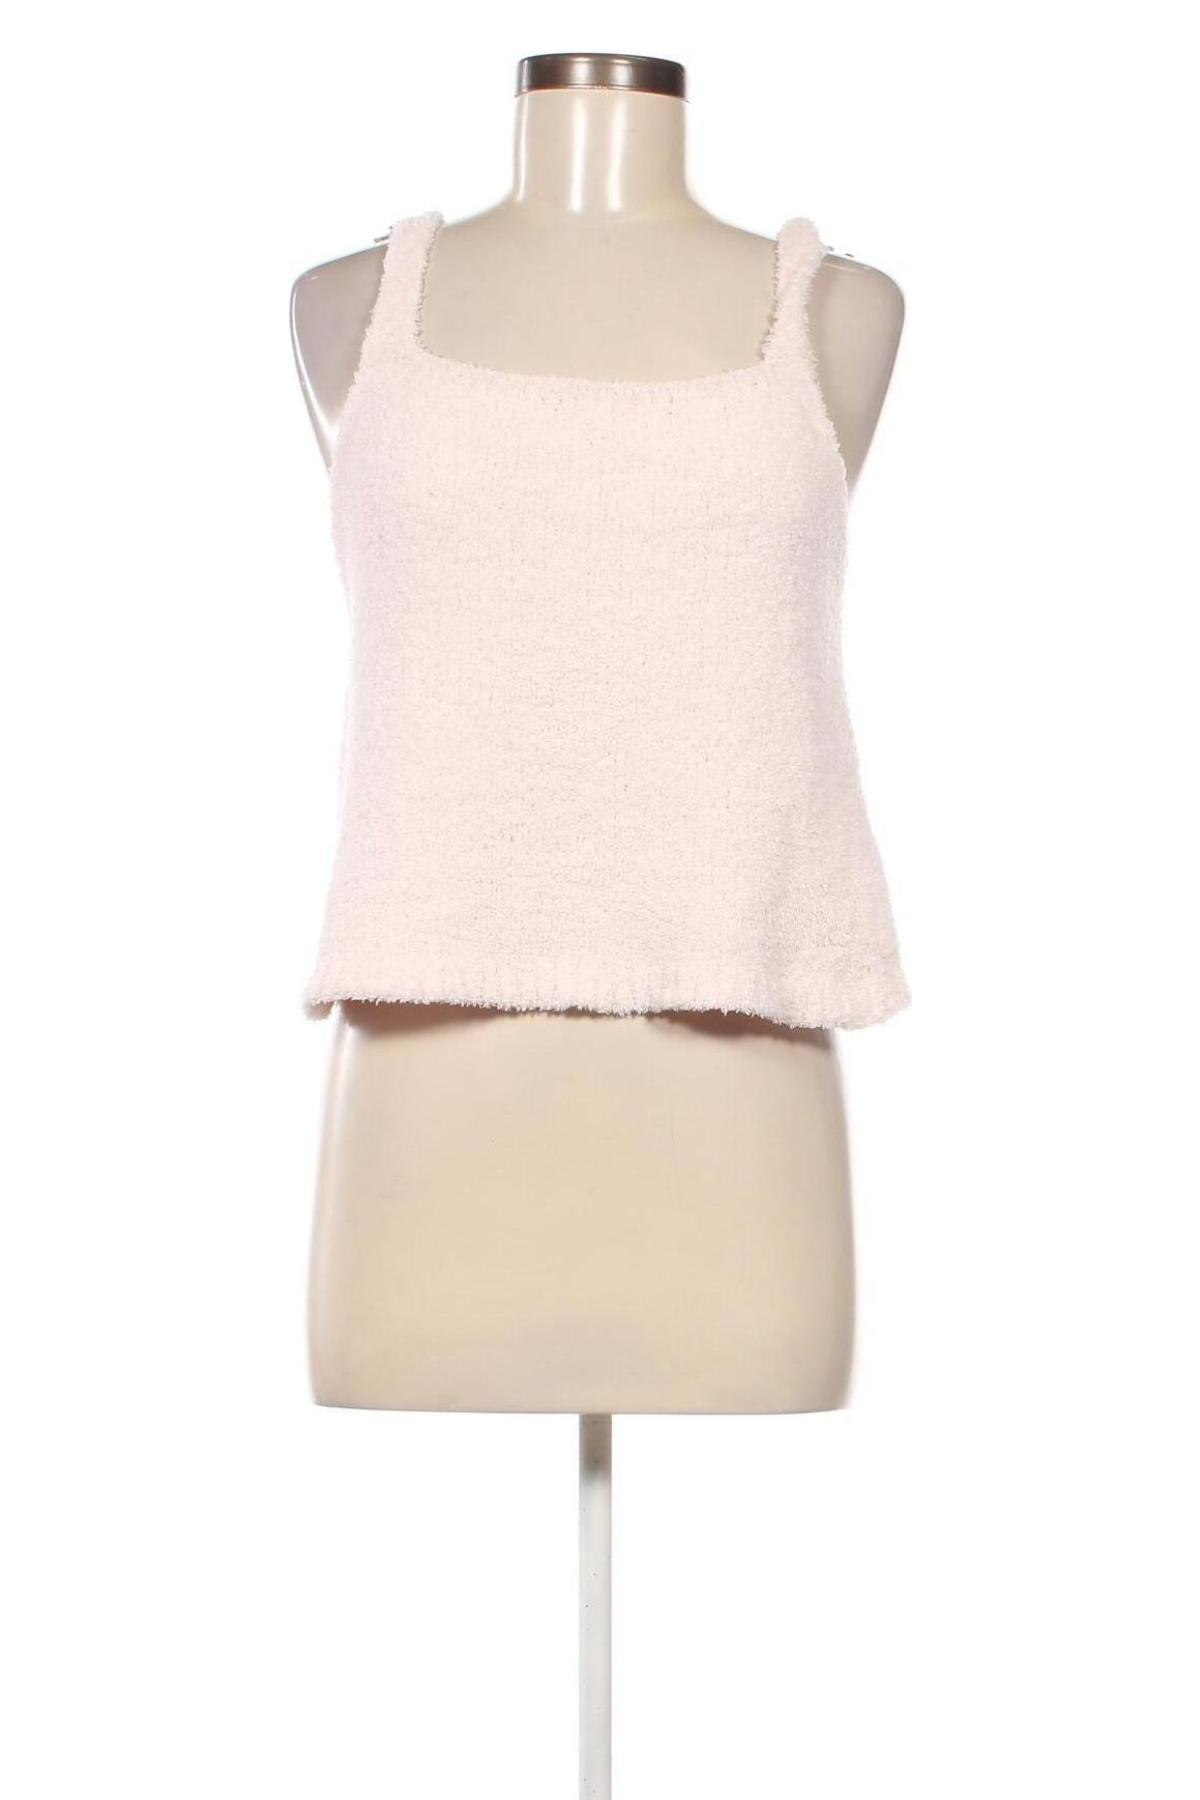 Damentop Missguided x Madison Beer, Größe L, Farbe Rosa, Preis 3,14 €